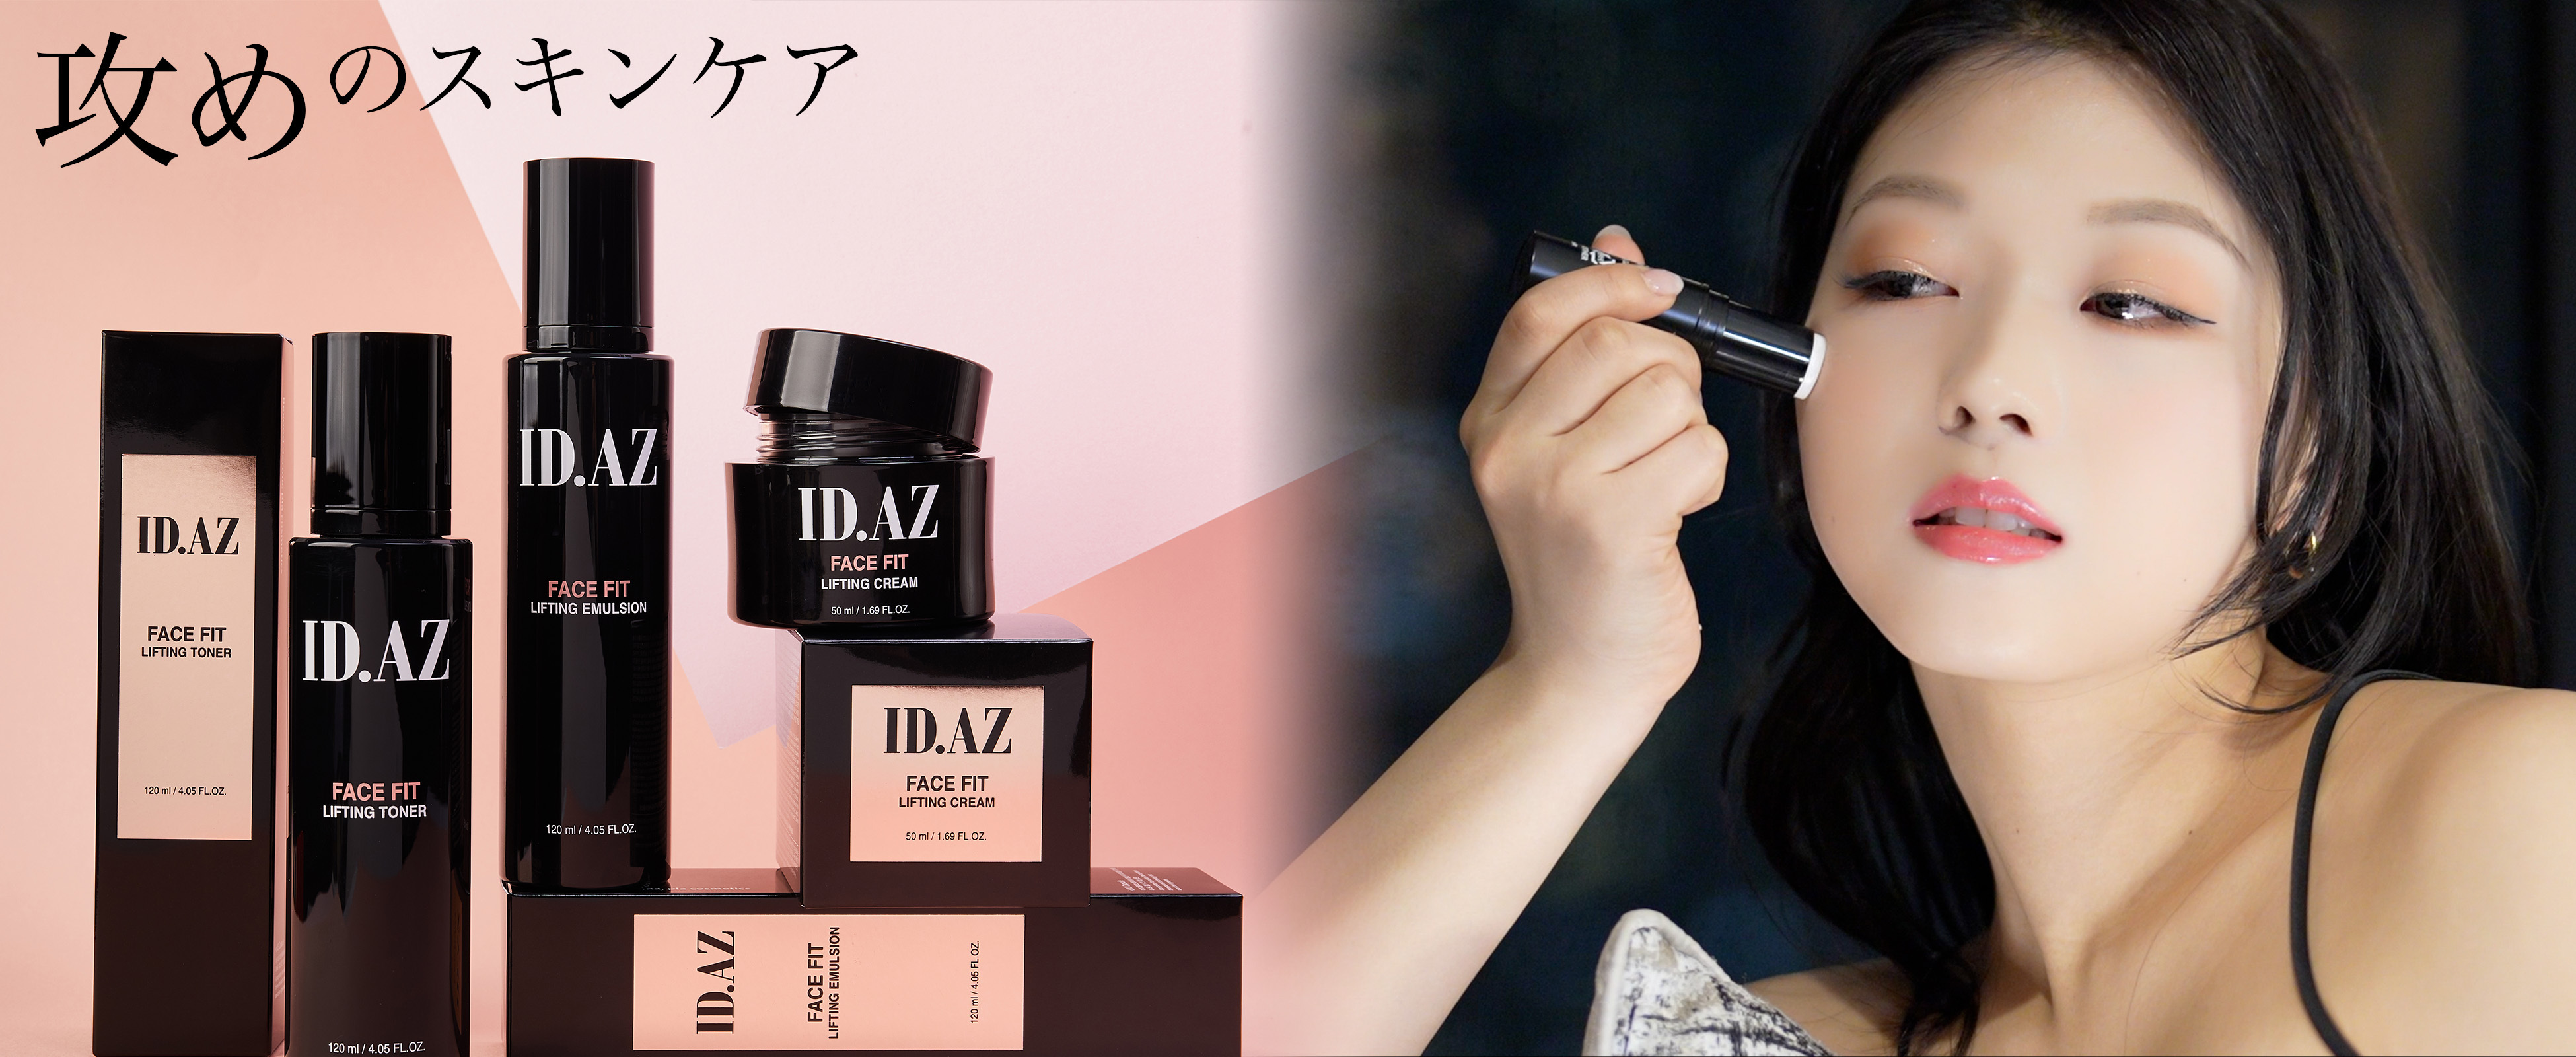 FACE FIT LF CREAM Id FACE FITシグニチャークリーム